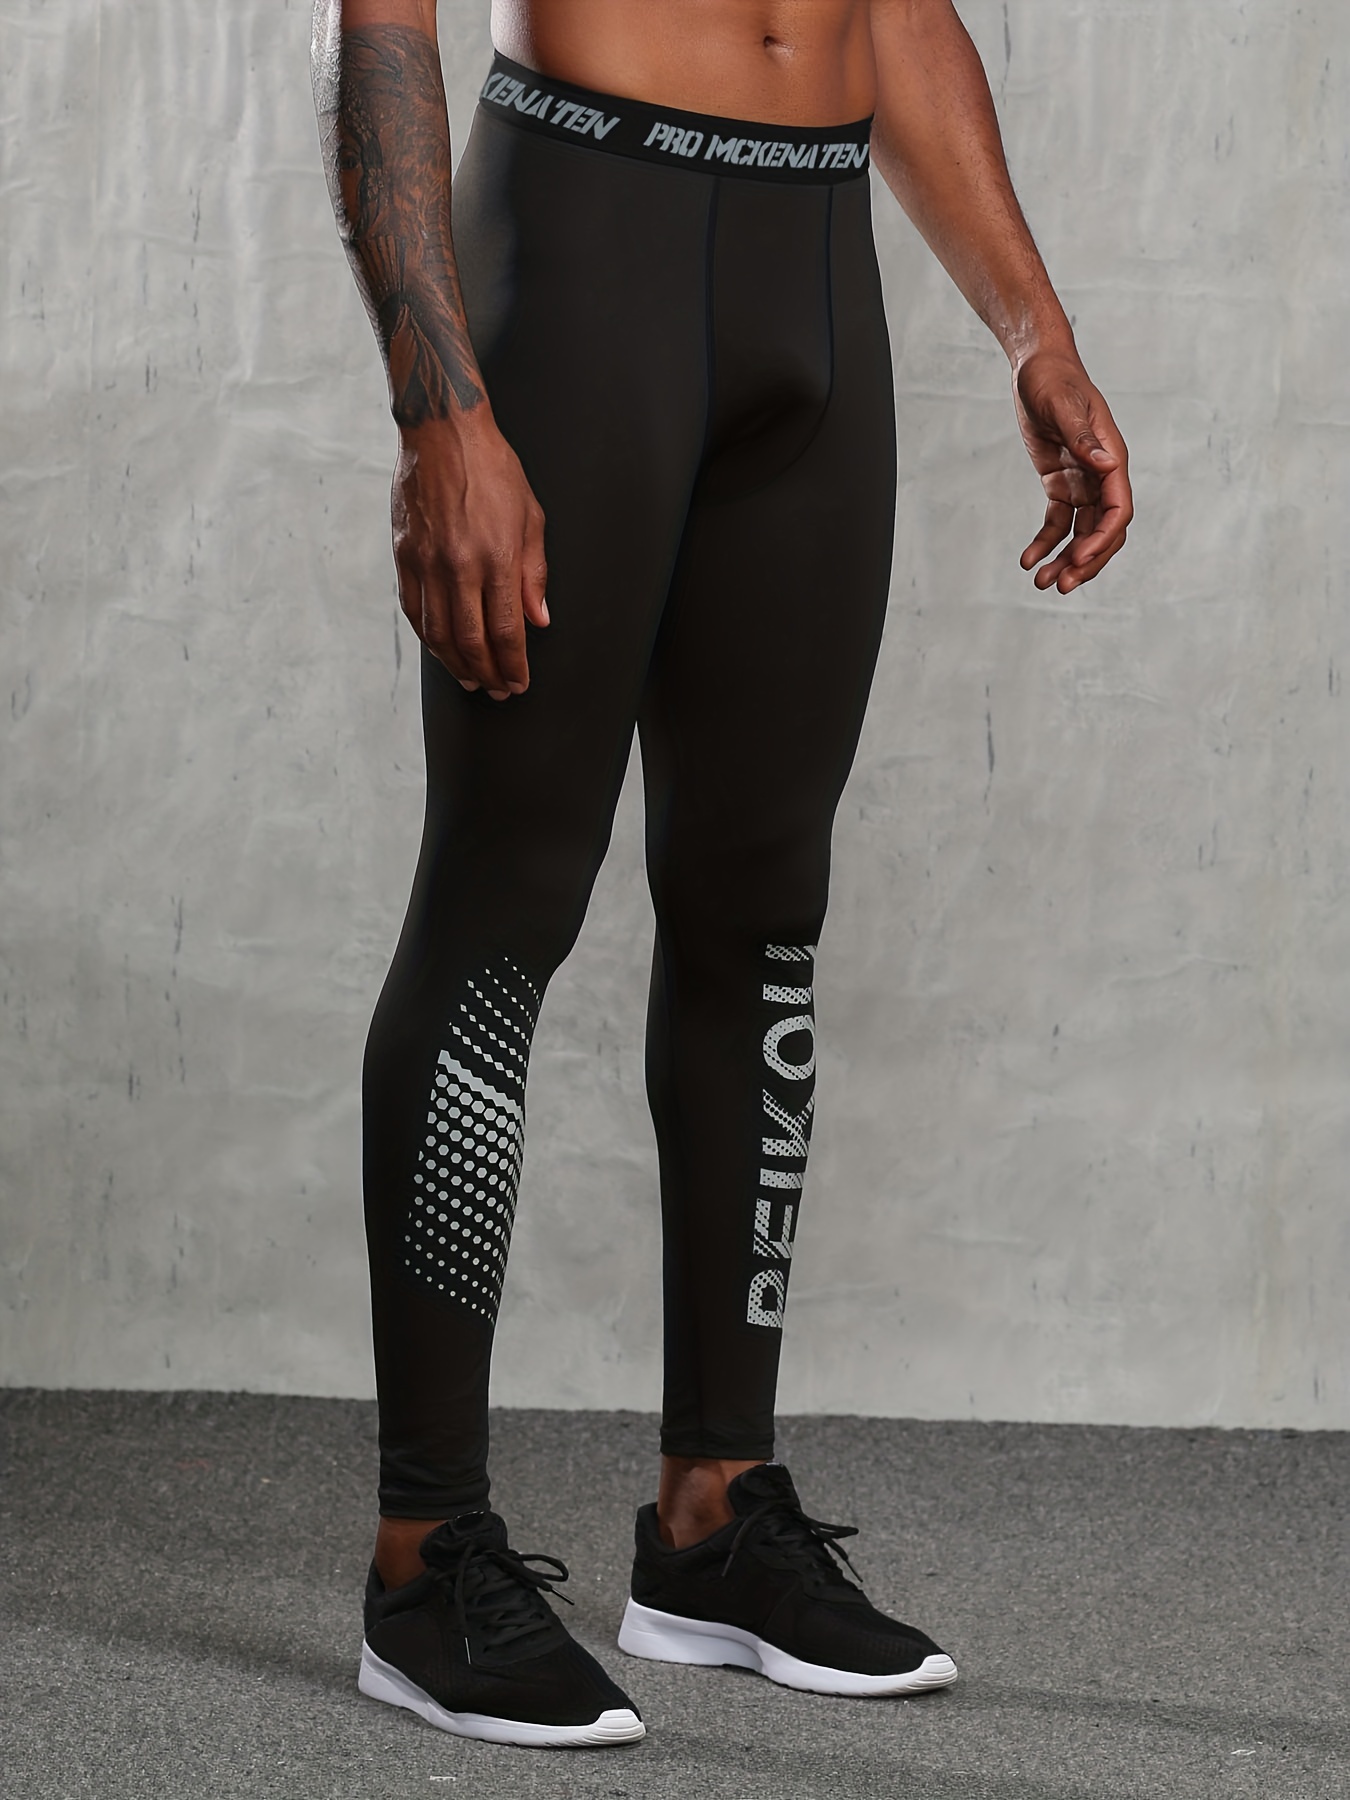 Men's Letter Graphic Sports Tights, Body Shaper, Compression Gym Pants